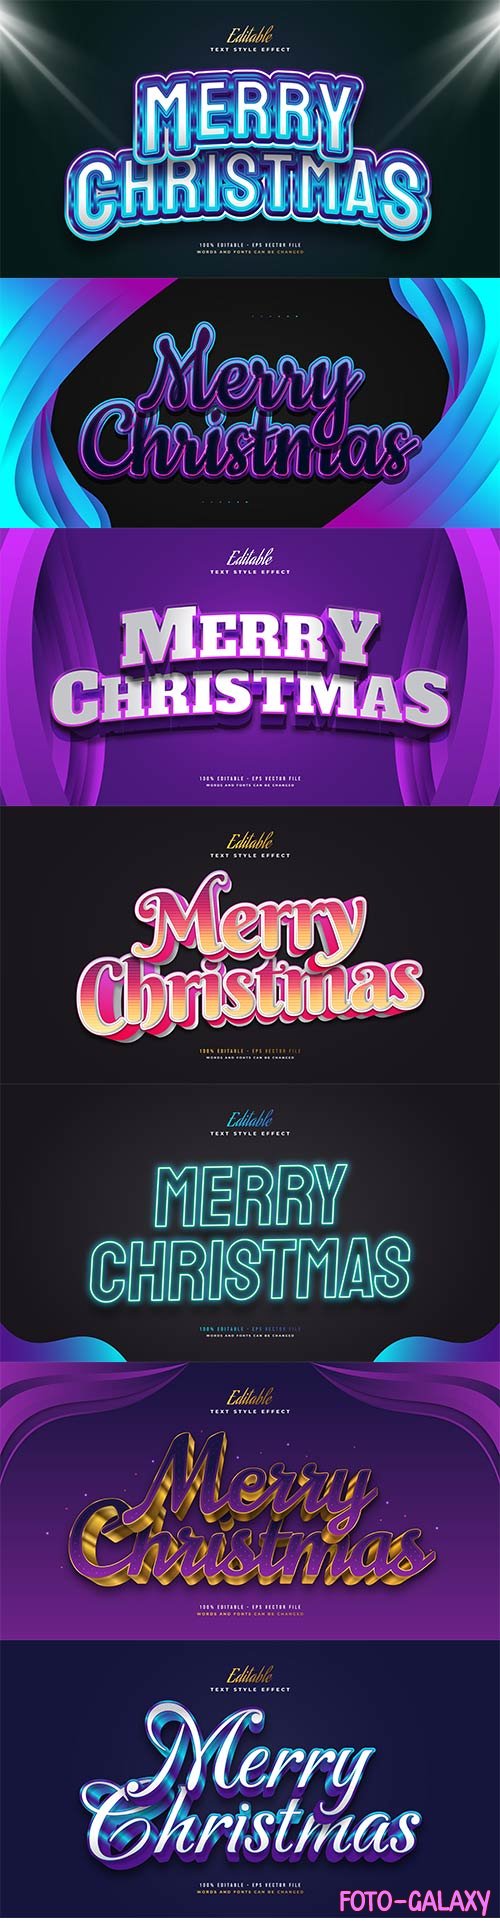 Merry christmas and happy new year 2022 editable vector text effects vol 22